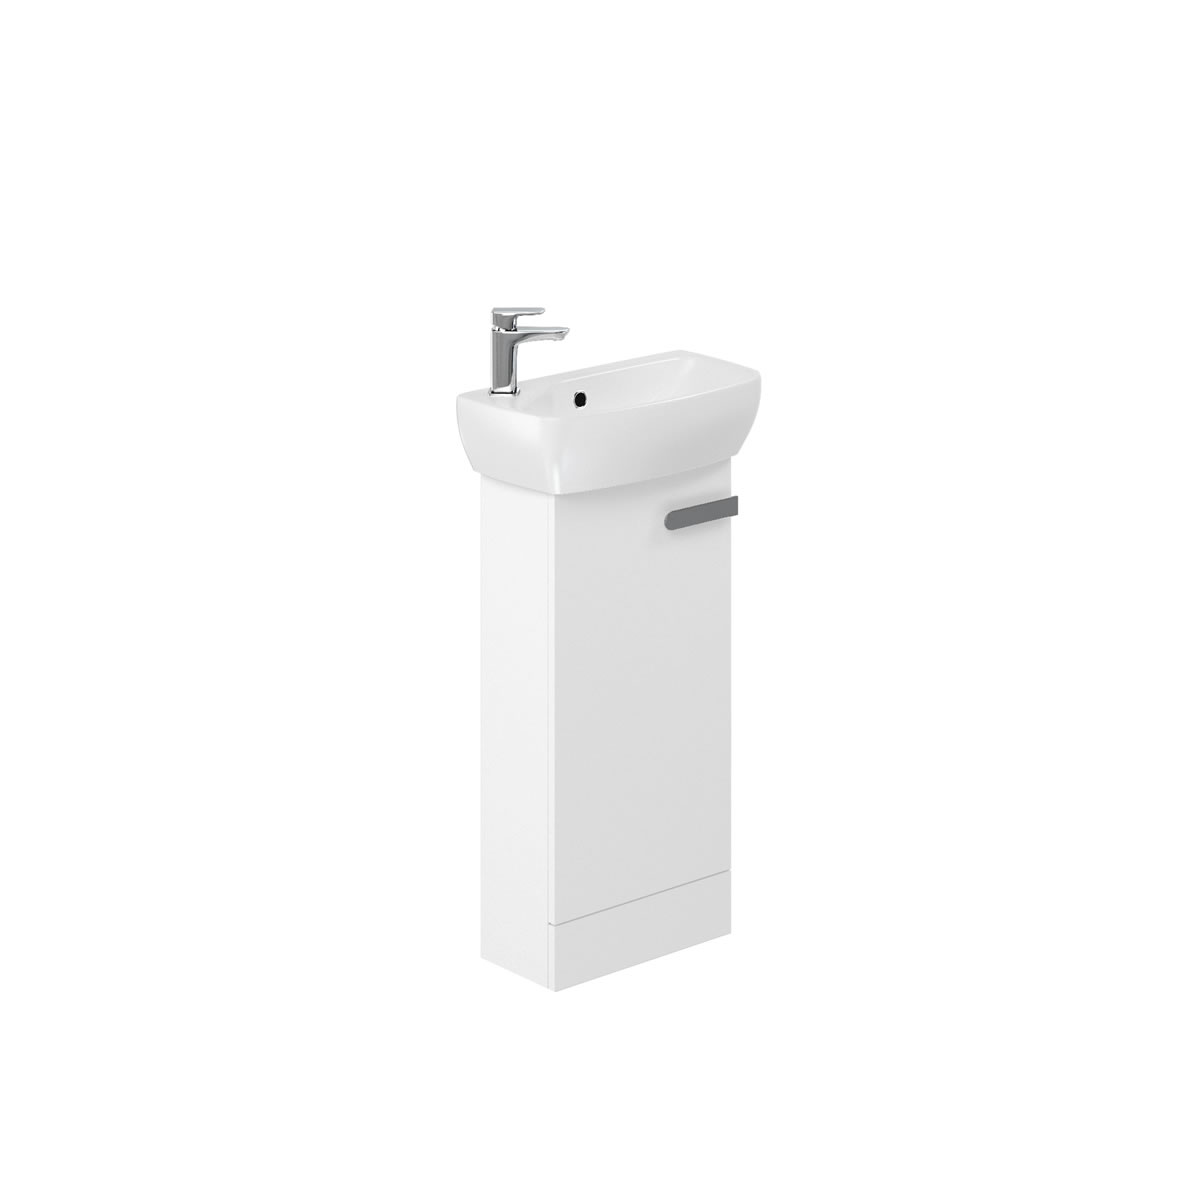 MyHome Cloakroom Floor Standing Unit & Basin